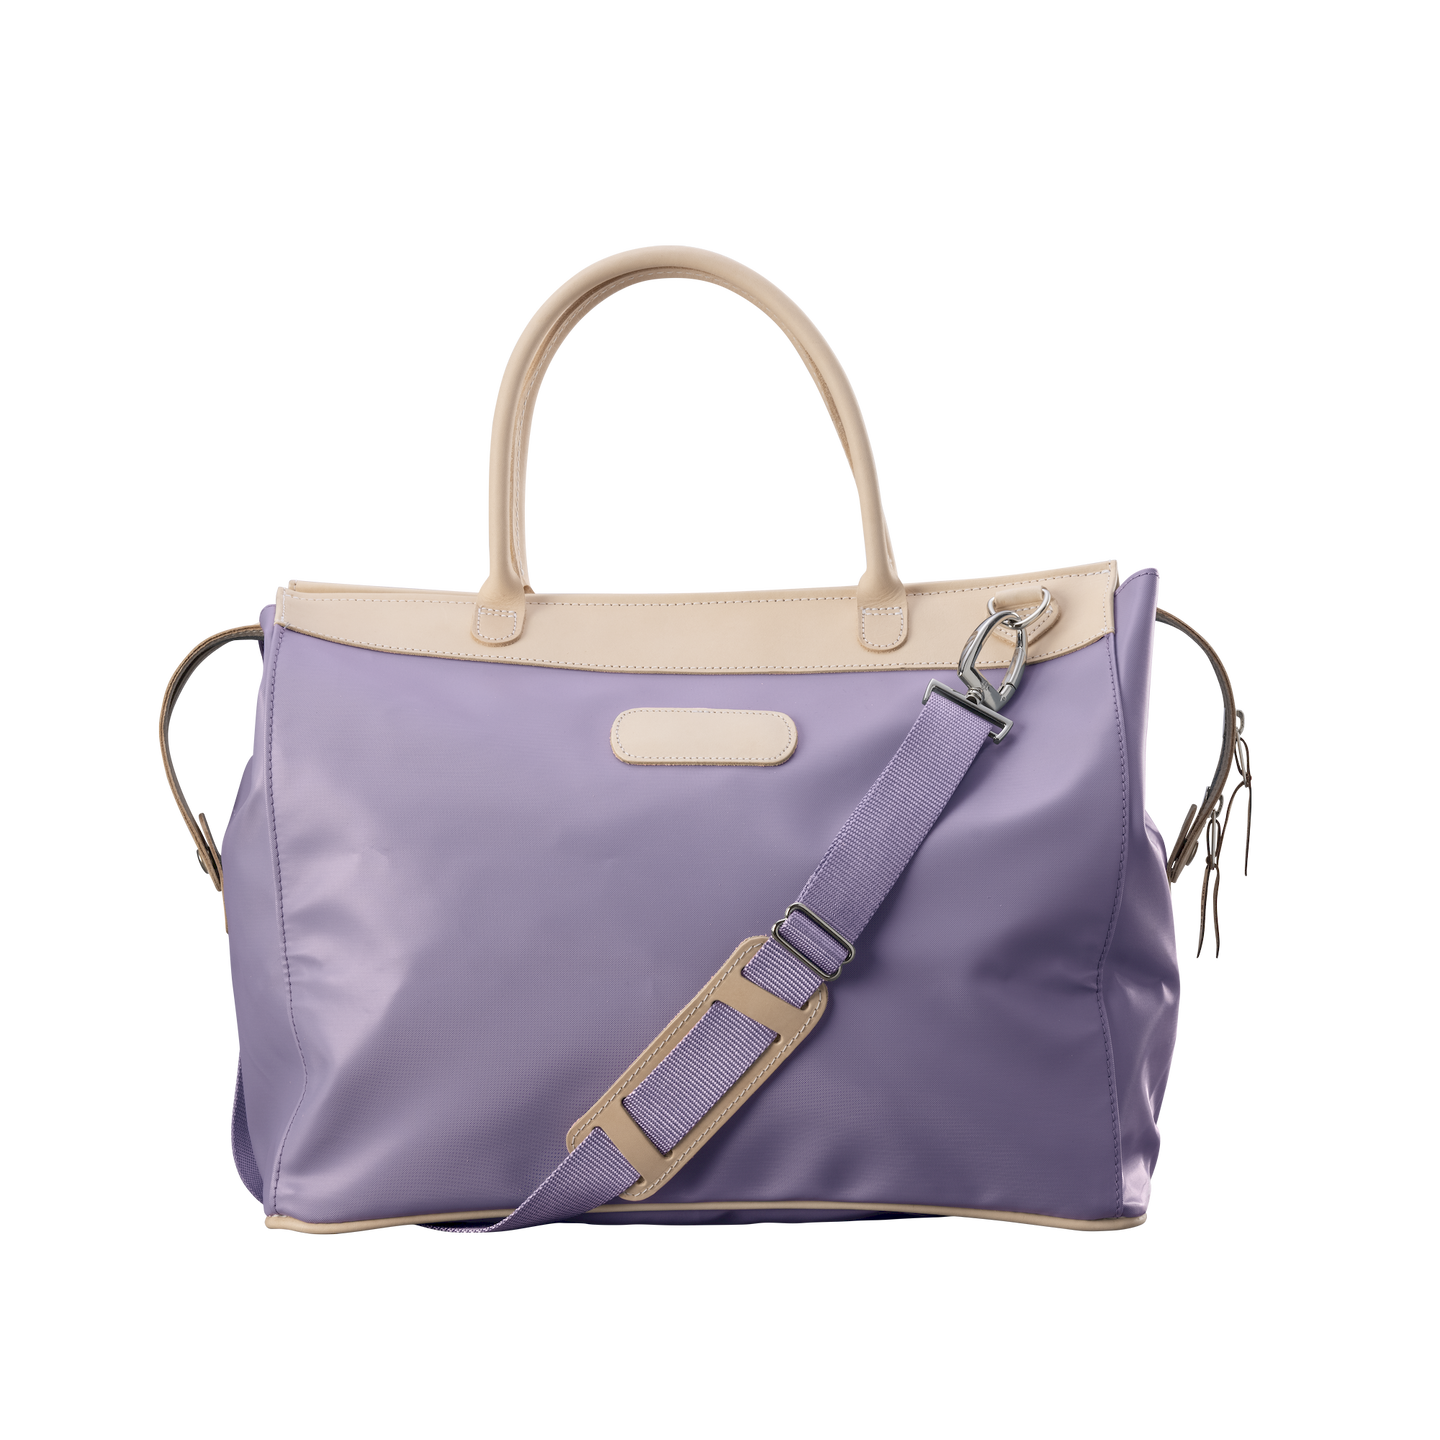 Burleson Bag - Lilac Coated Canvas Front Angle in Color 'Lilac Coated Canvas'